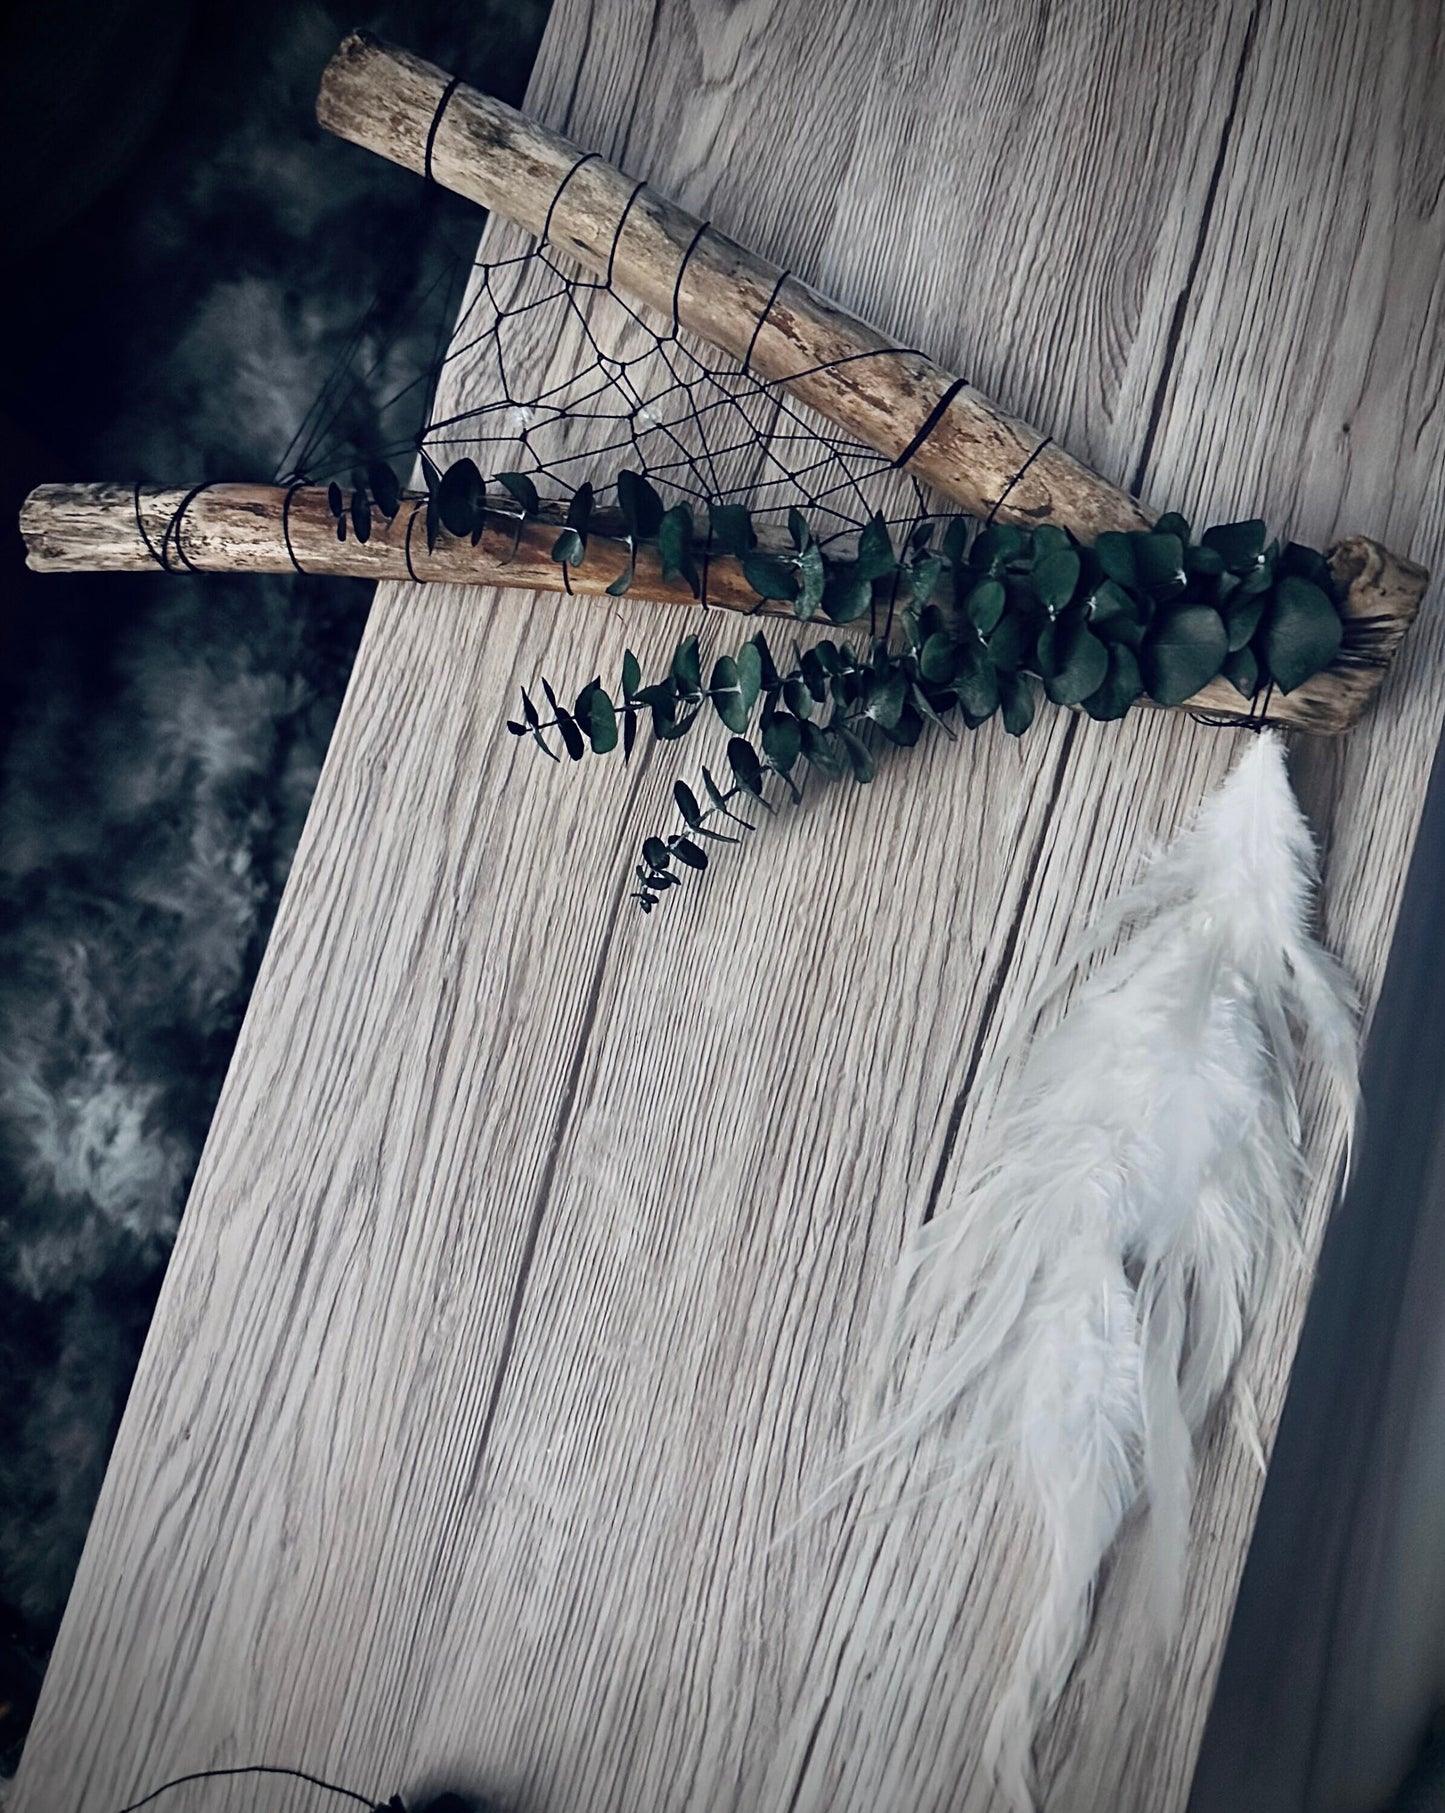 Boho reclaimed forest wood dreamcatcher with preserved fragrant eucalyptus and feathers. Gorgeous forest wood that can hang on the wall with nails, or I can attach a cord to hang it with, it can be made with hooks underneath to hand small items.